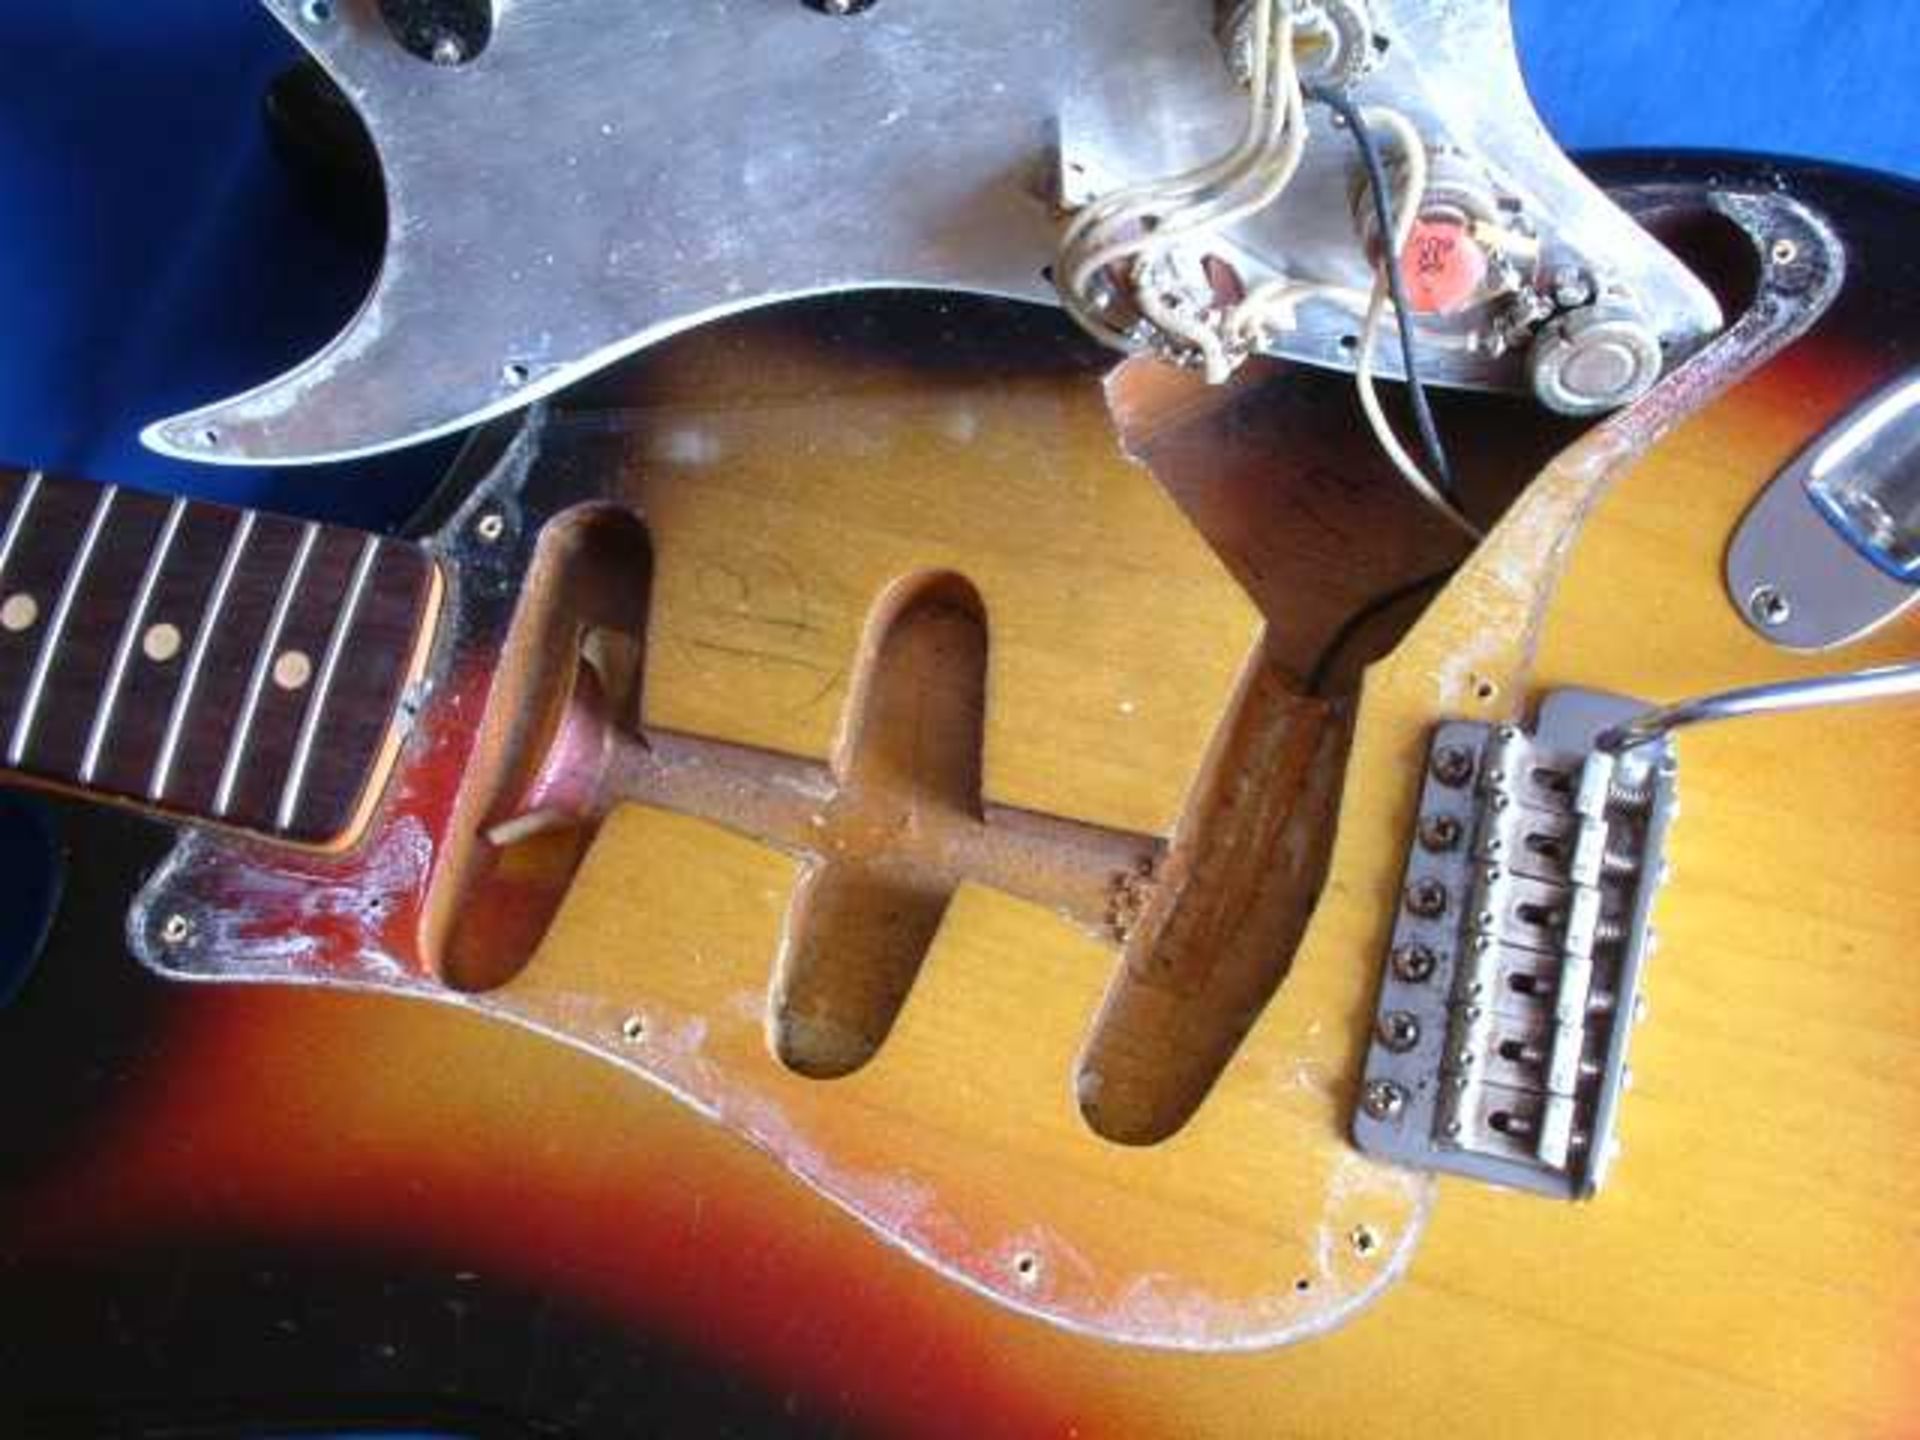 A 1963 Fender Stratocaster electric guitar, - Image 18 of 32